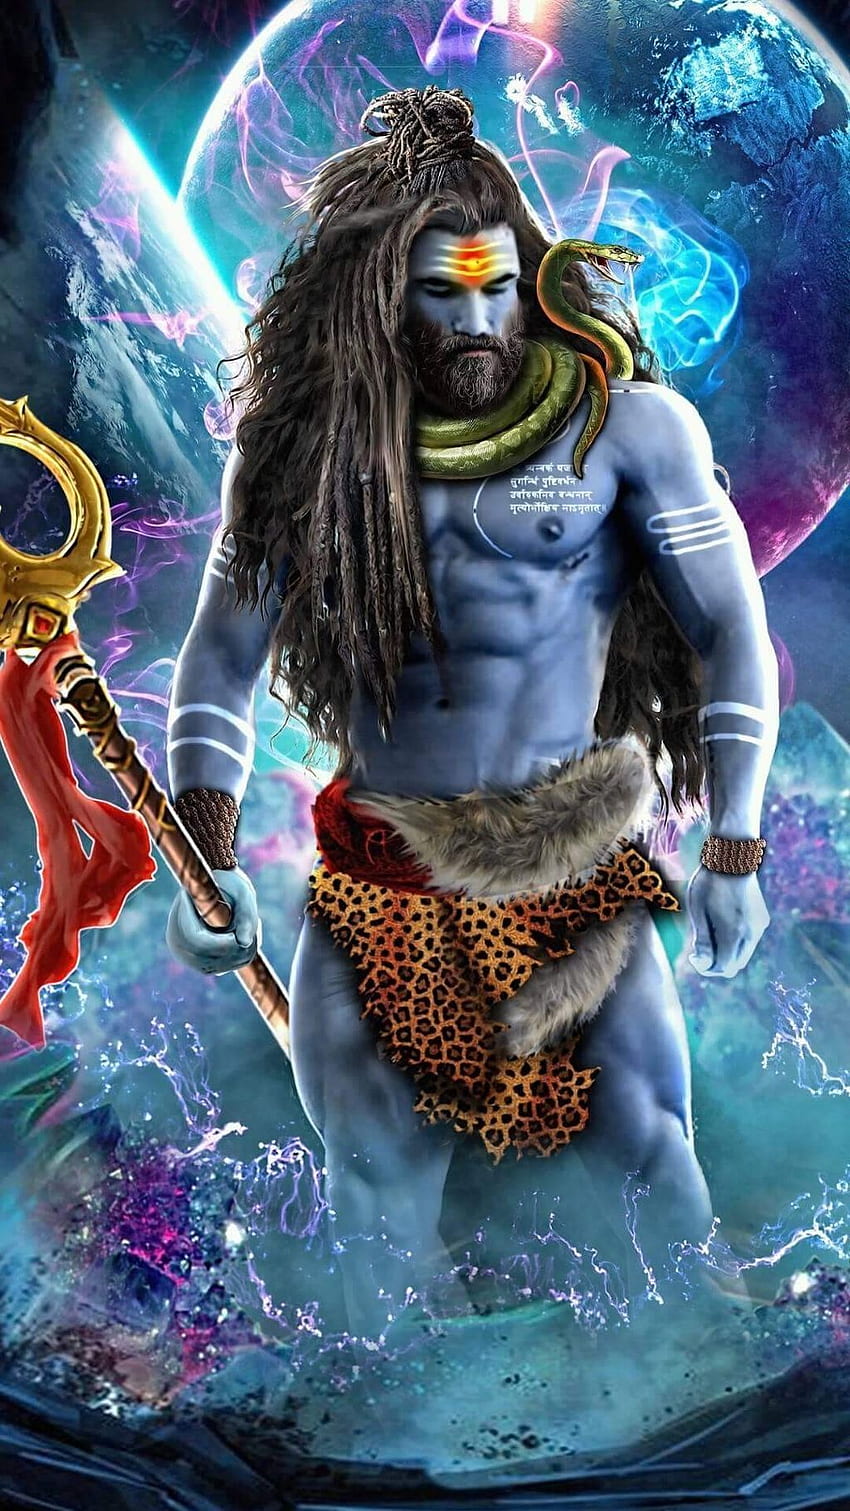 "Ultimate Collection of Aghori HD Images: Top 999+ Stunning & High